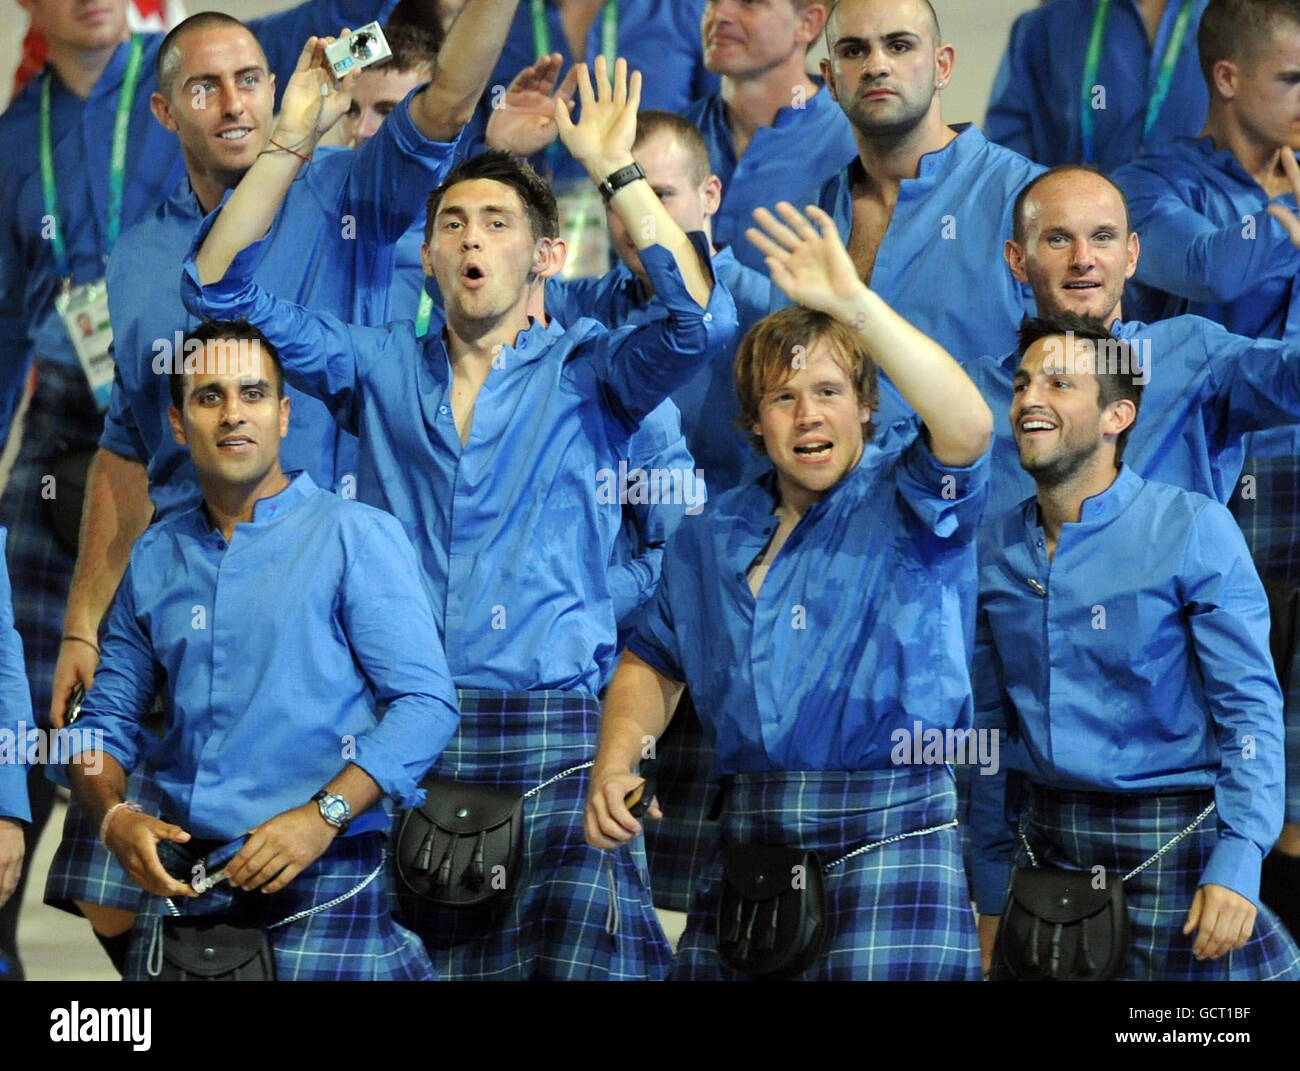 Members of the Scotland team wave during the 2010 Commonwealth Games opening ceremony at the Jawaharlal Nehru Stadium in New Delhi, India. Stock Photo